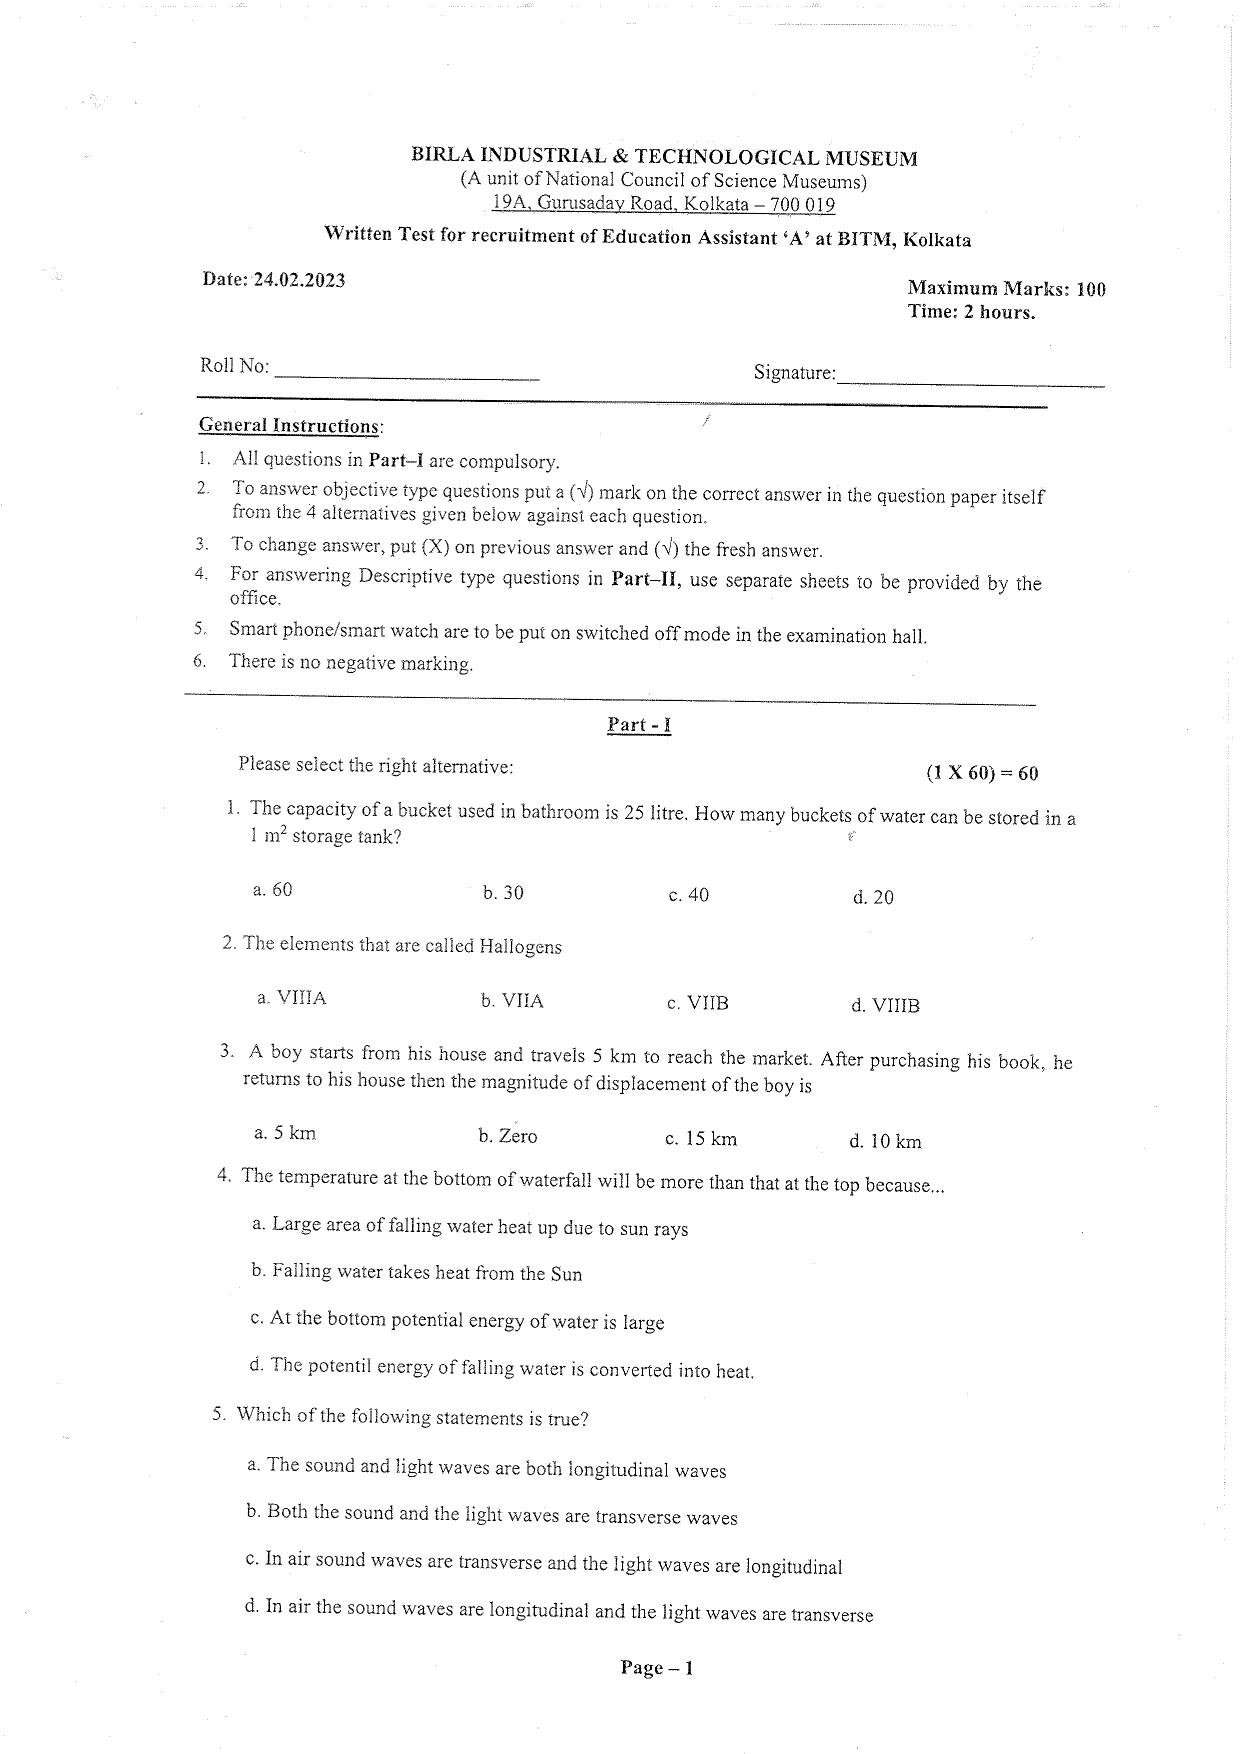 Question Paper of Education Assistant ‘A’ - Page 1